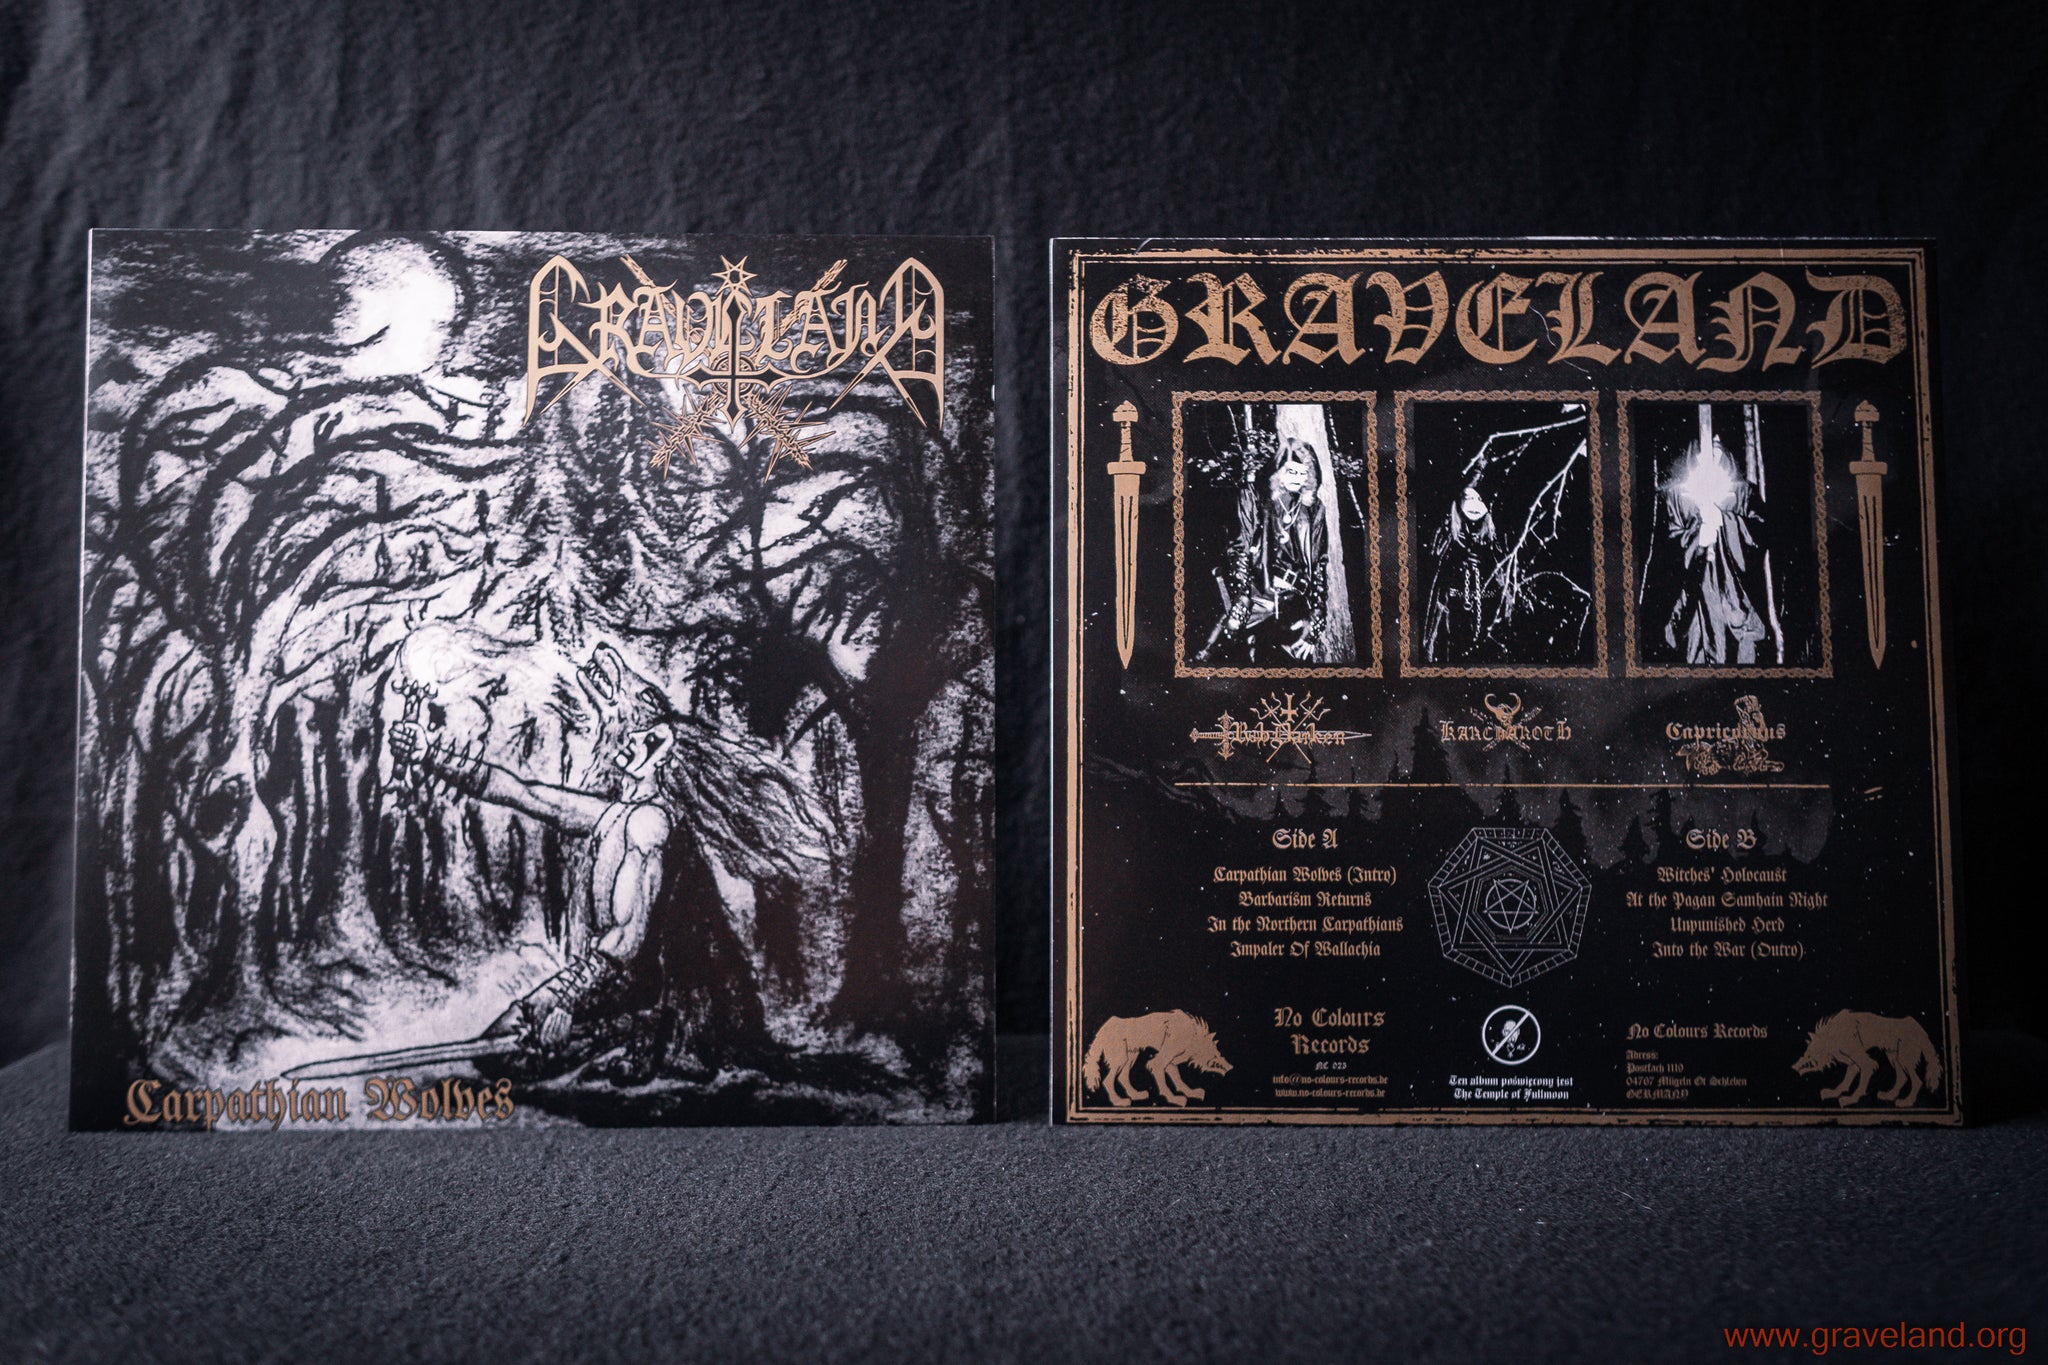 Graveland - Carpathian Wolves - LP (new Edition,gold letters & inlay)